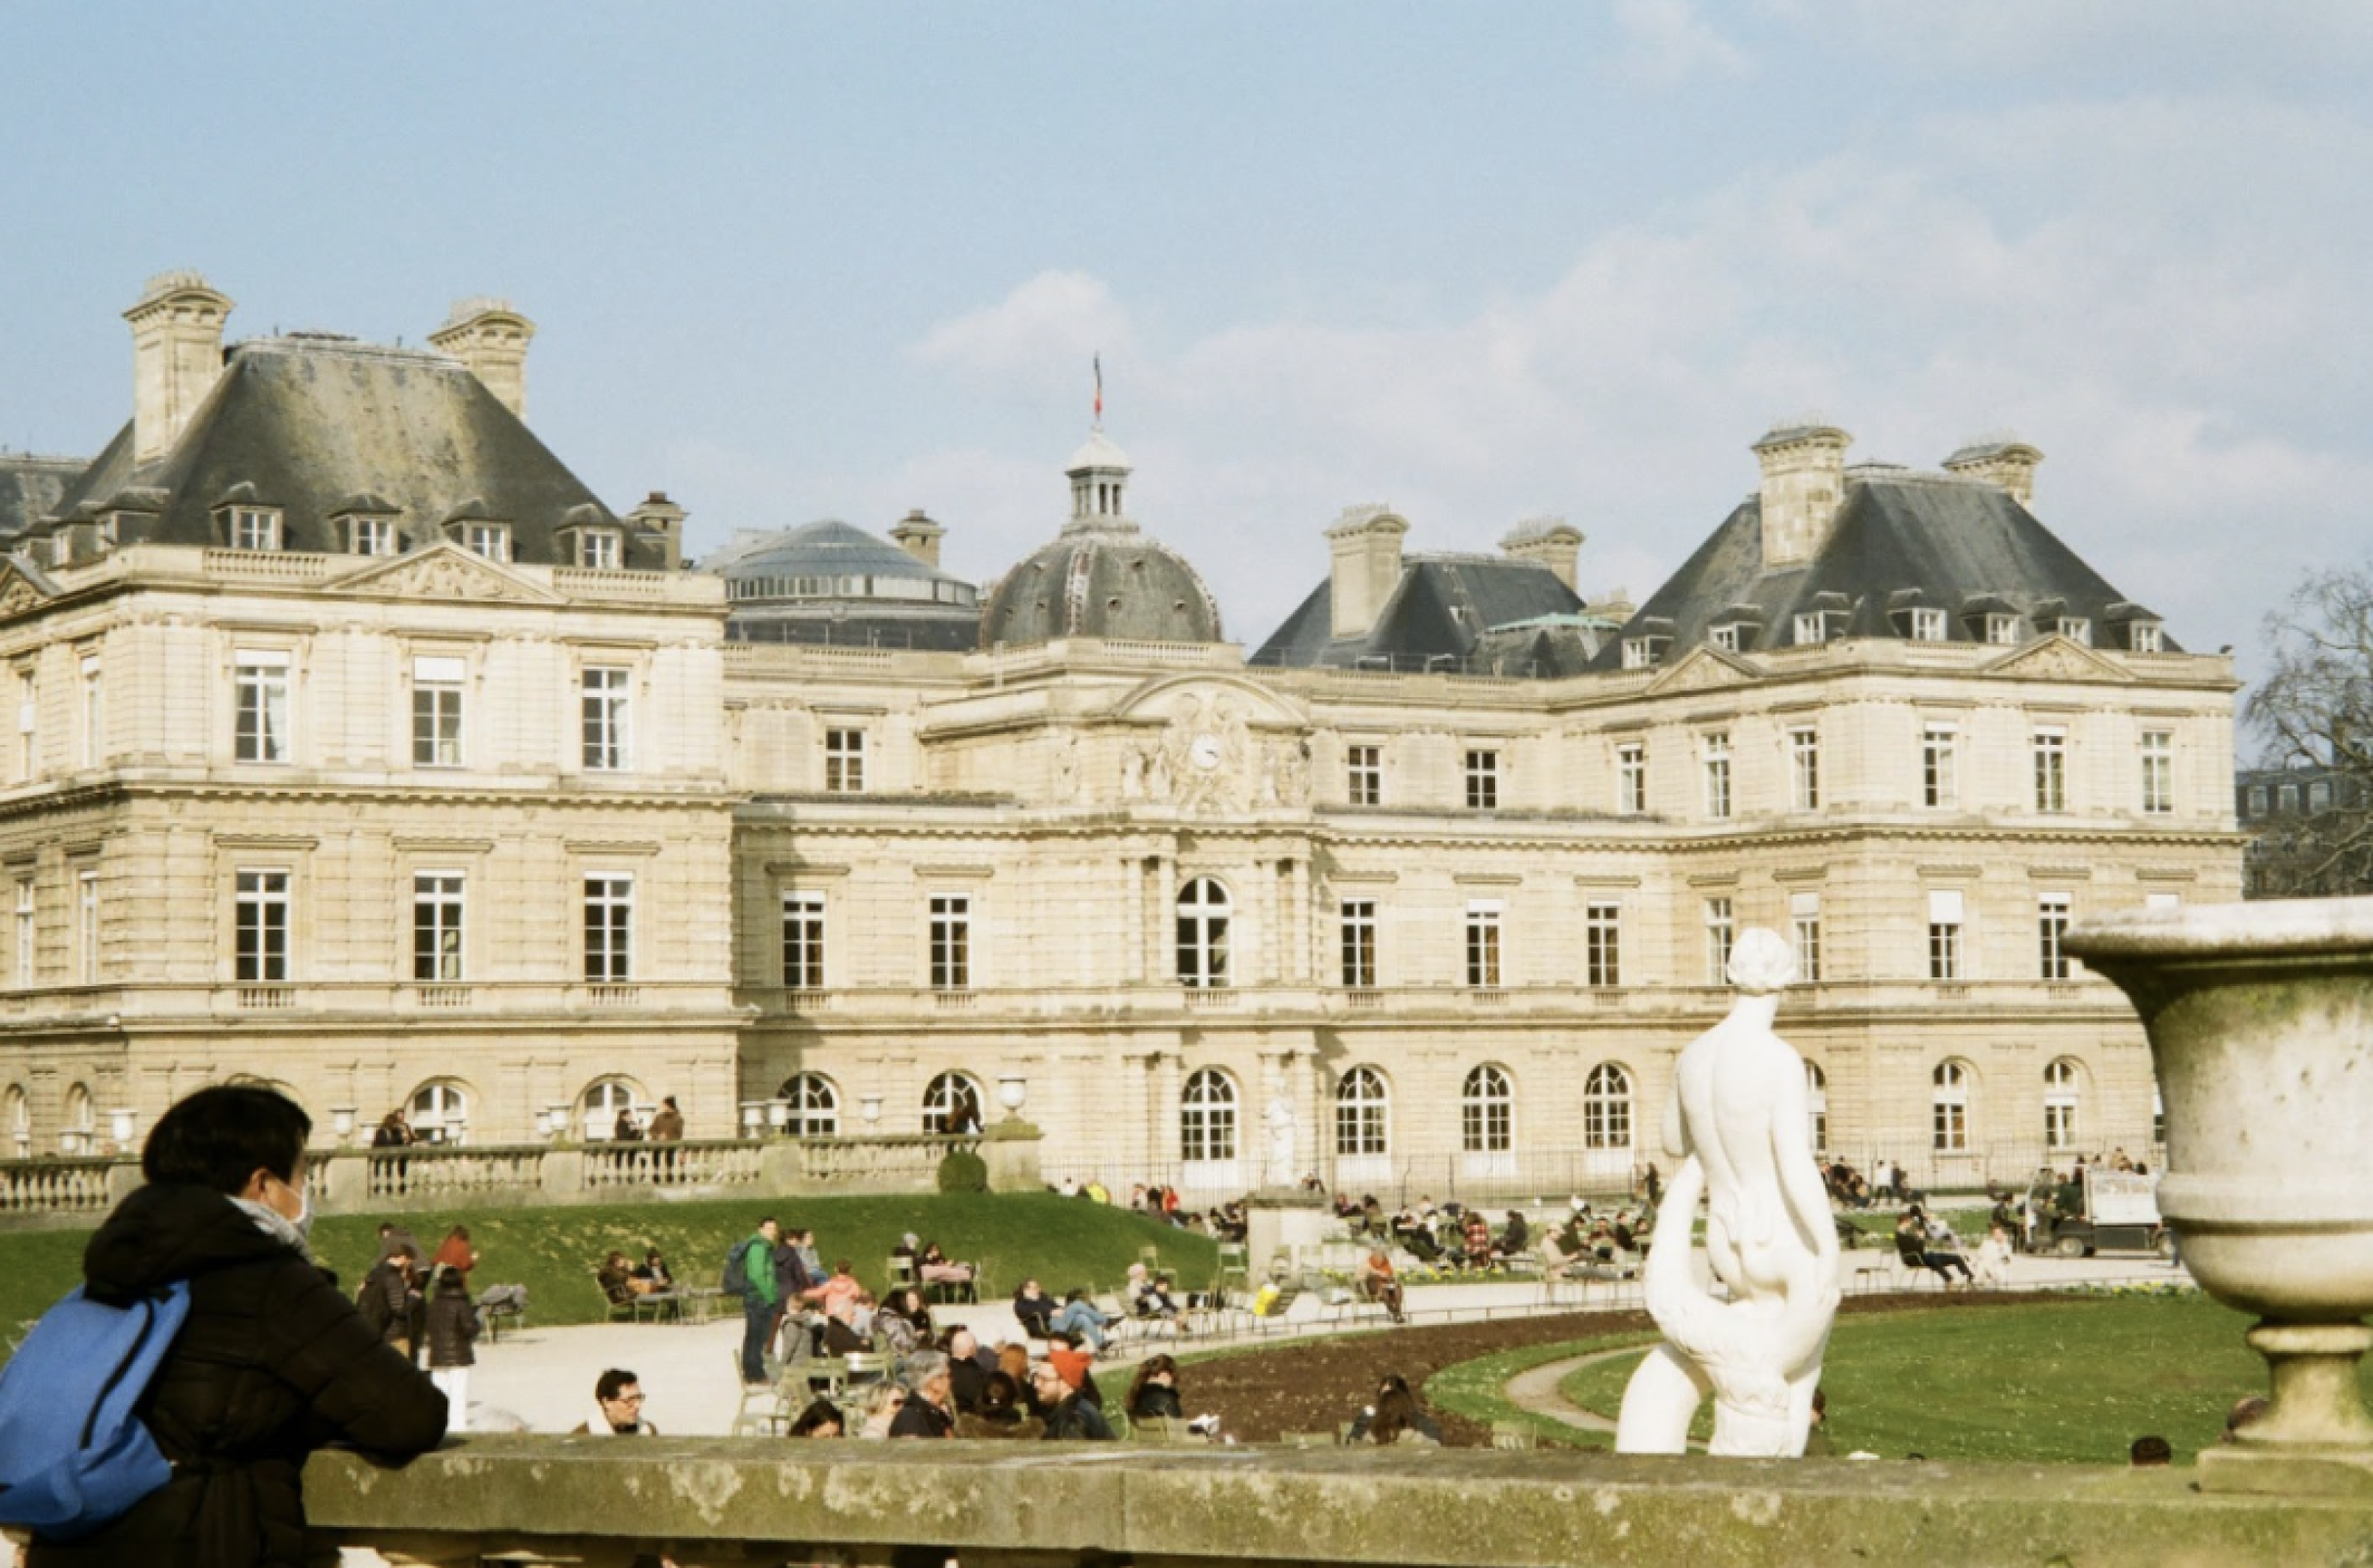 Luxembourg Gardens is always a favorite of ours, and we love a sunday stroll in the park